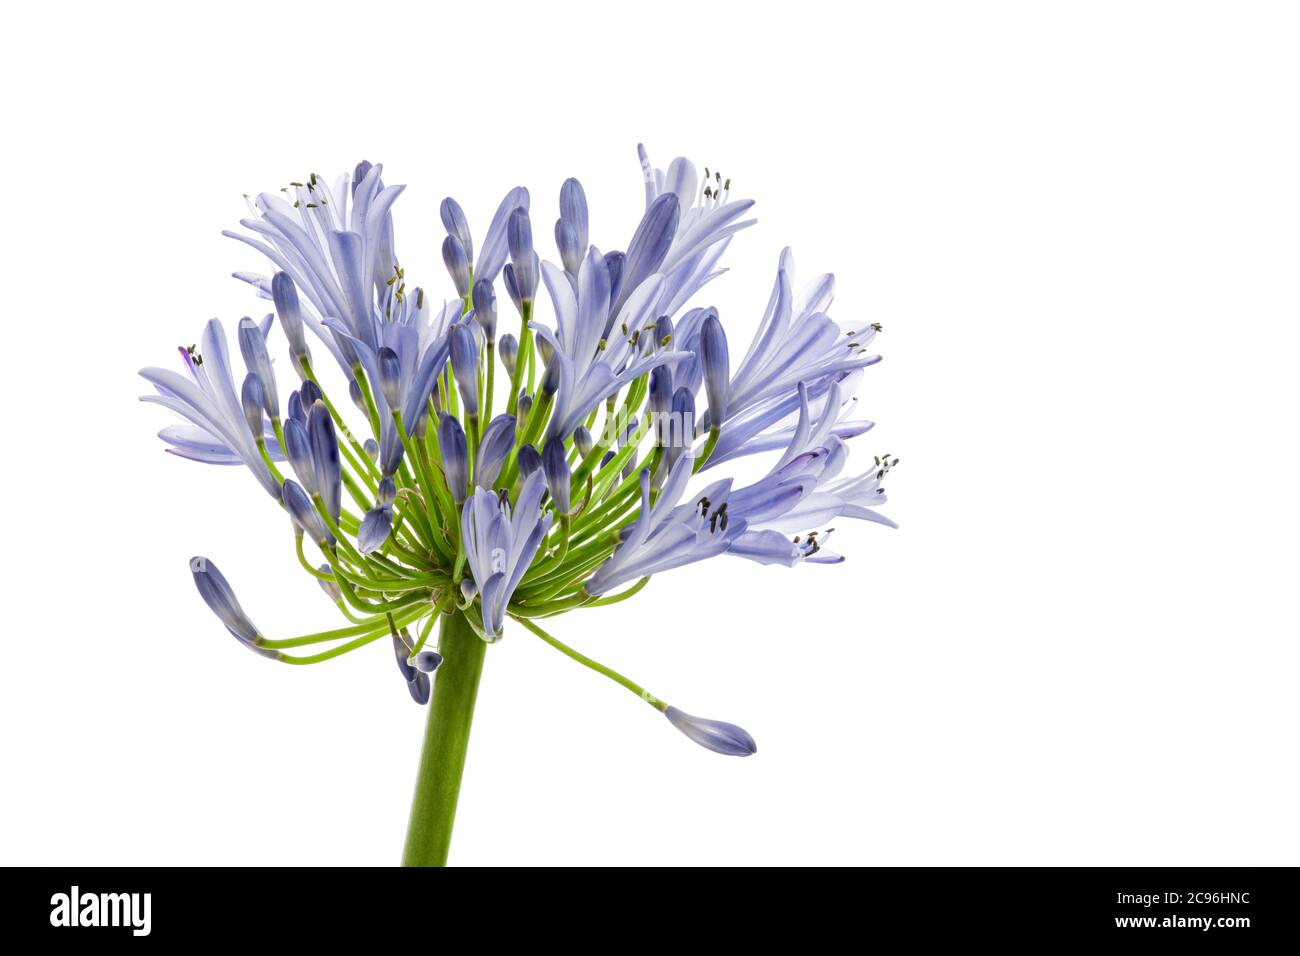 Blue Agapanthus flower photographed against a plain white background Stock Photo